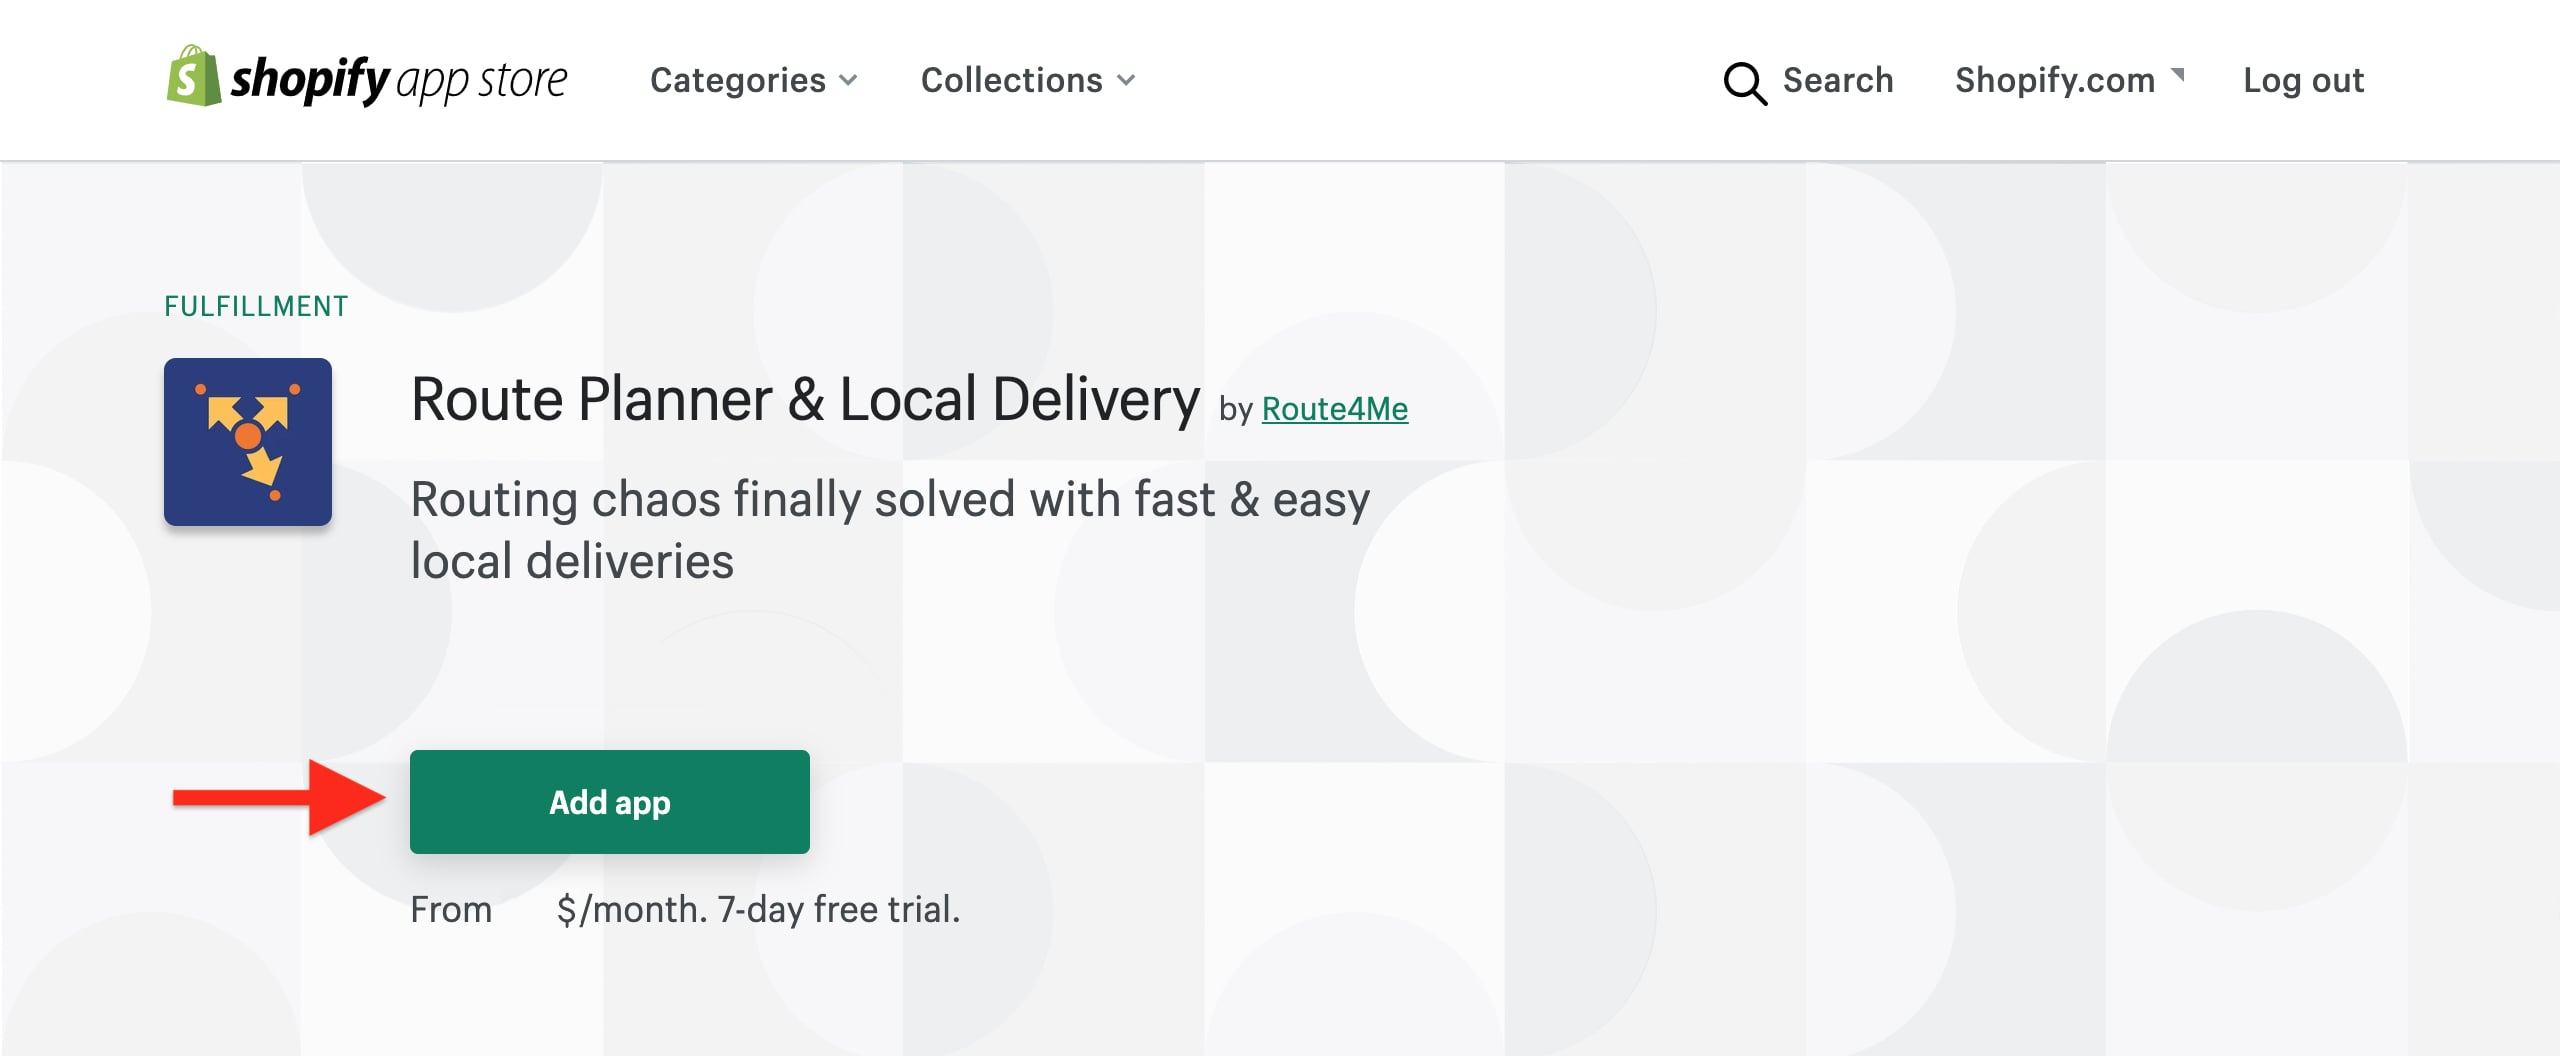 Route planner and local delivery app for e-commerce stores on the Shopify marketplace.